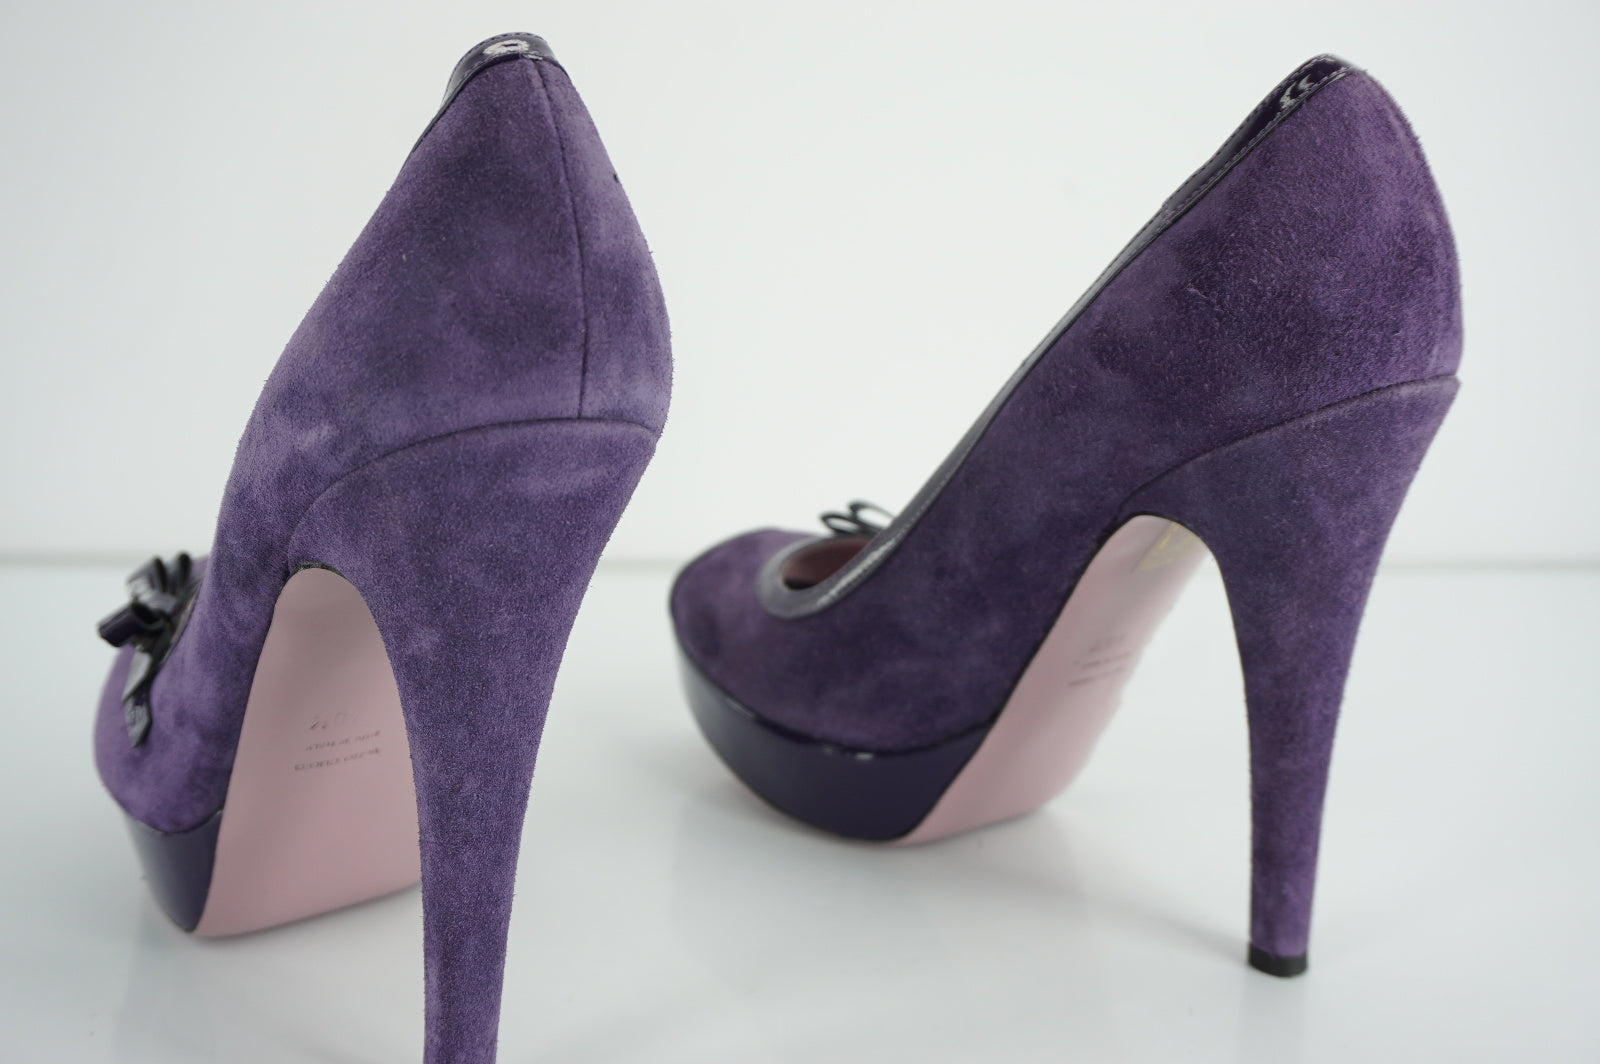 RED Valentino Purple Suede Open Toe Platform Pumps Size 40.5 10.5 bow $450